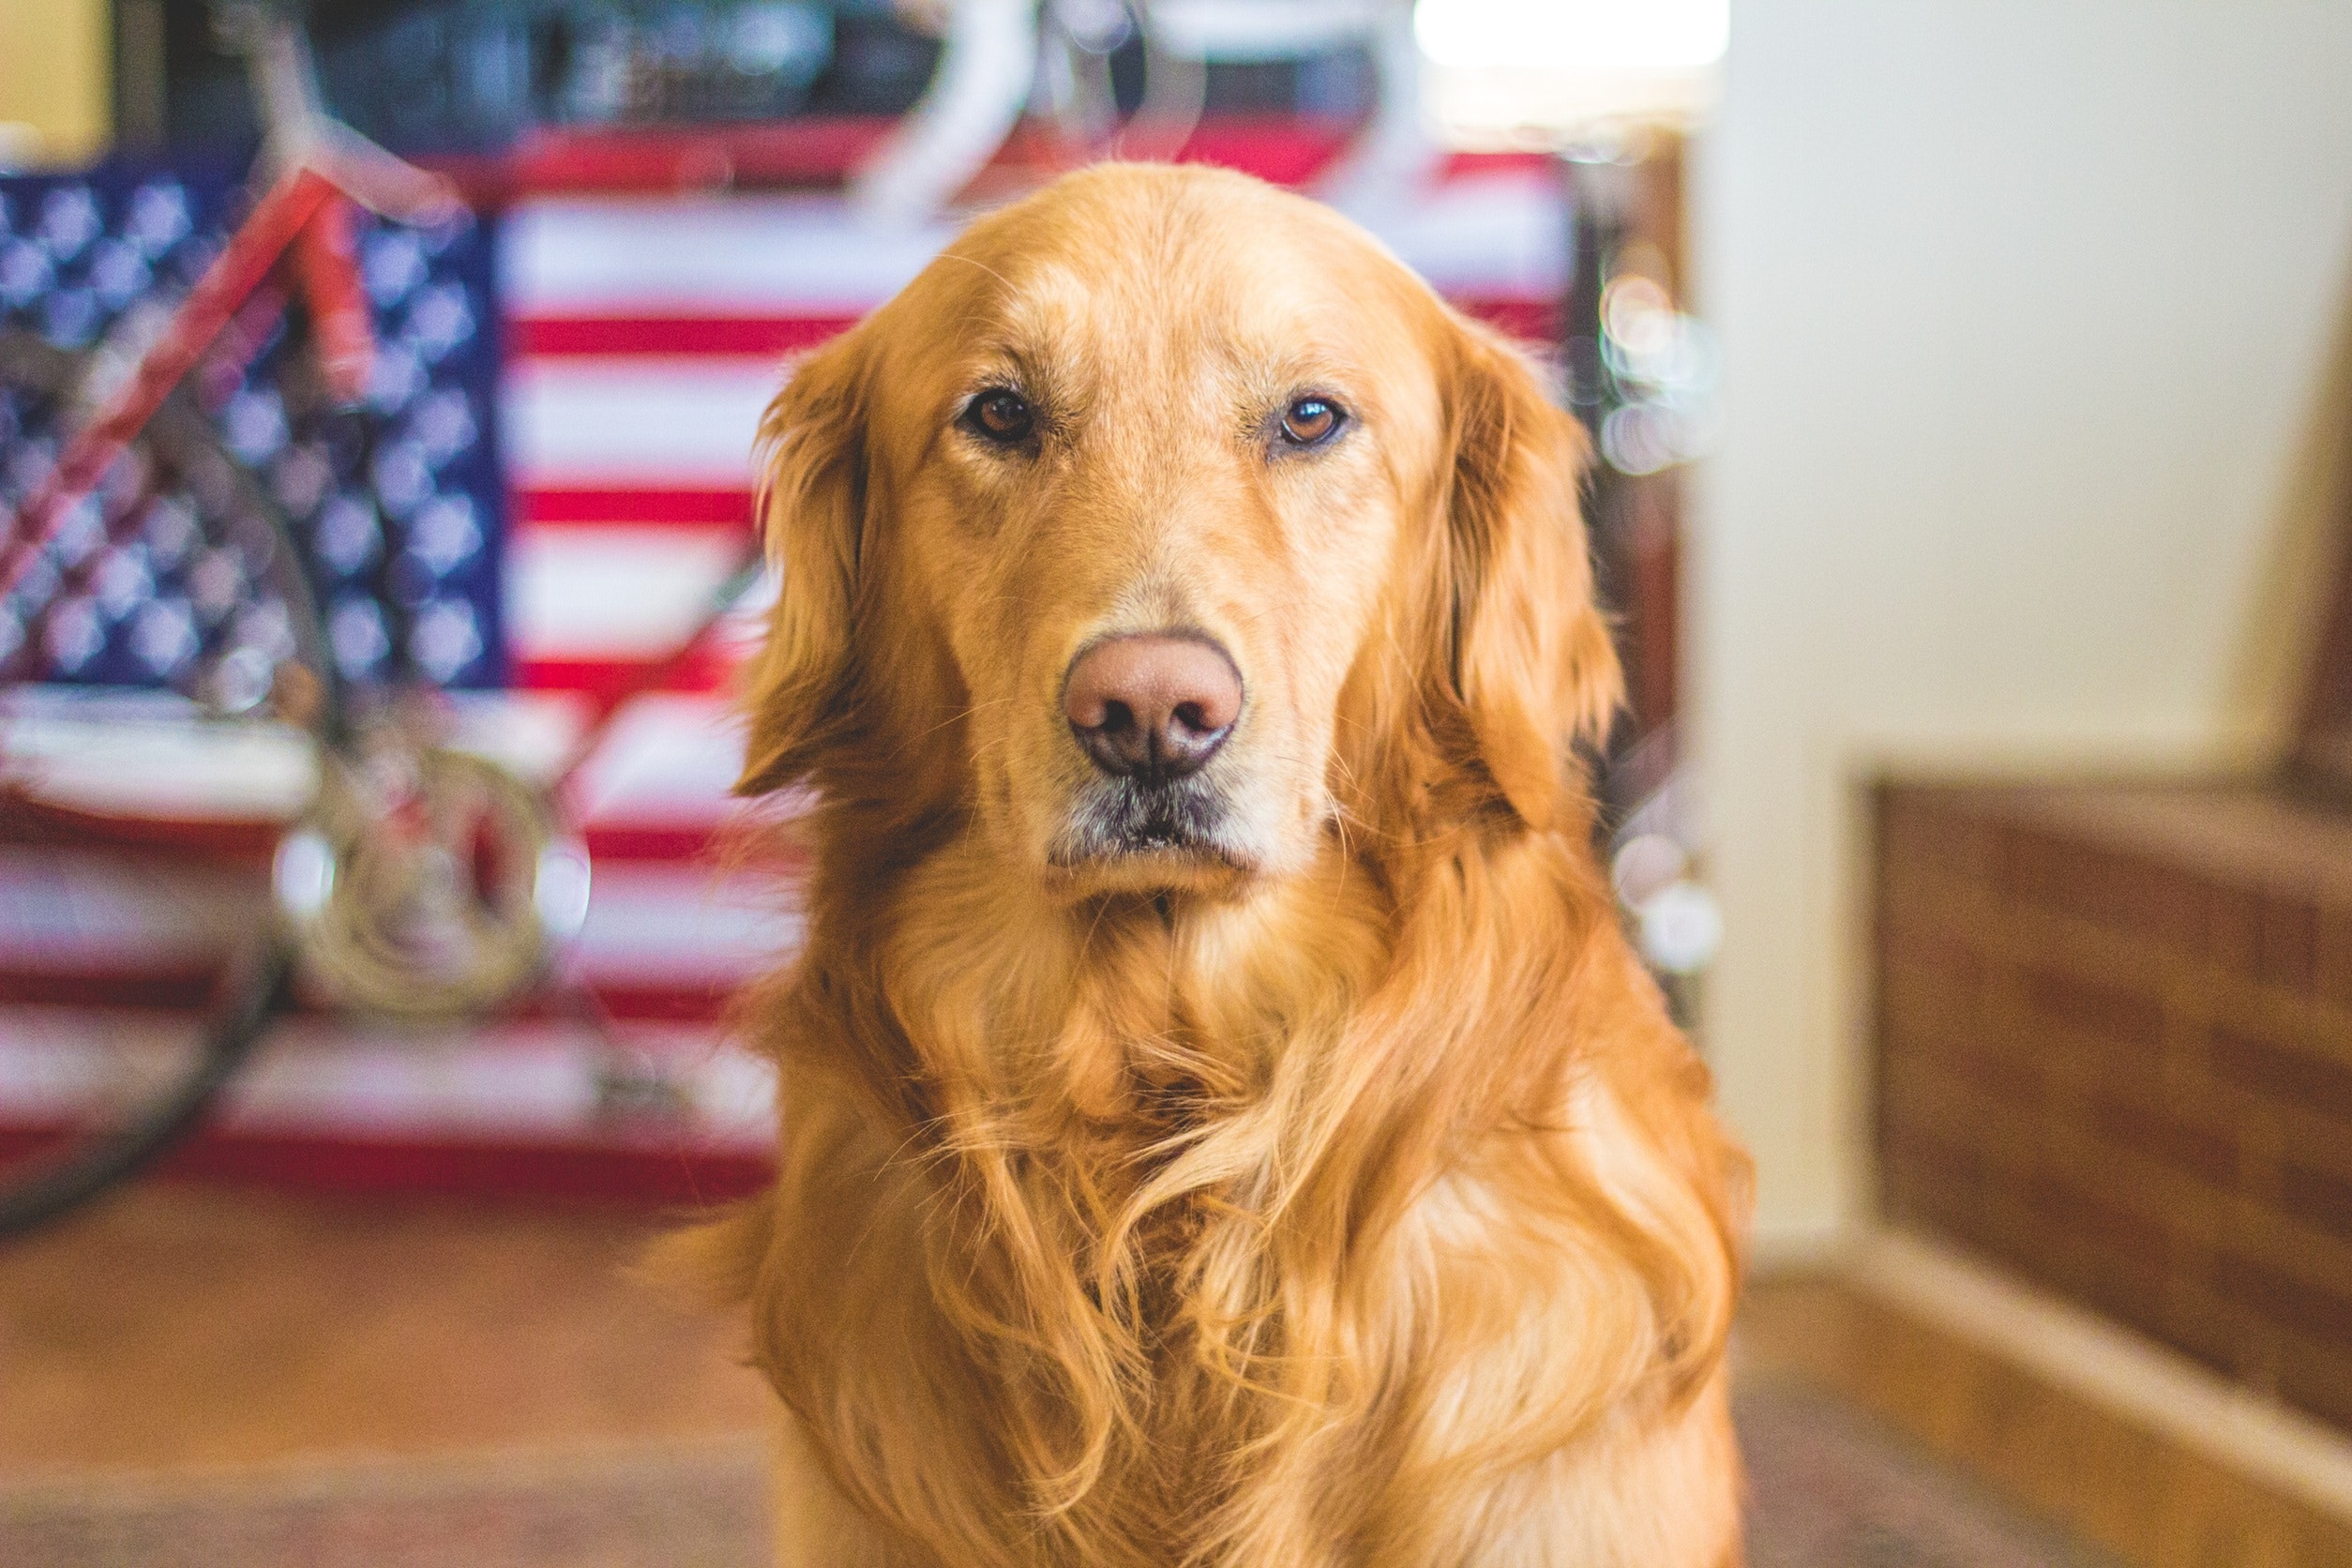 beautiful golden retriever sitting and posing with an american flag and bicycle in the background